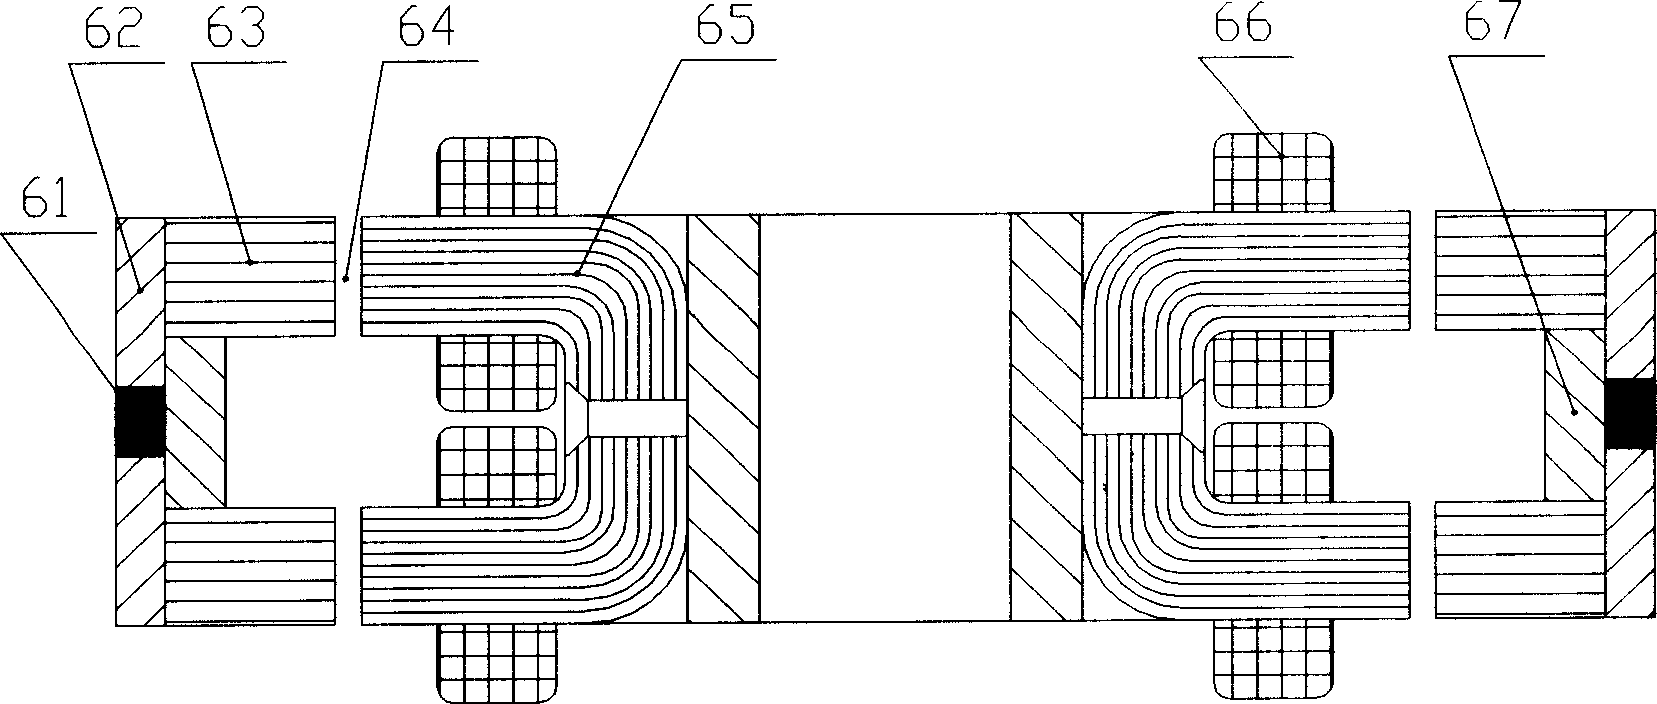 Energy-storing flywheel system with magnetic suspension for spacecraft